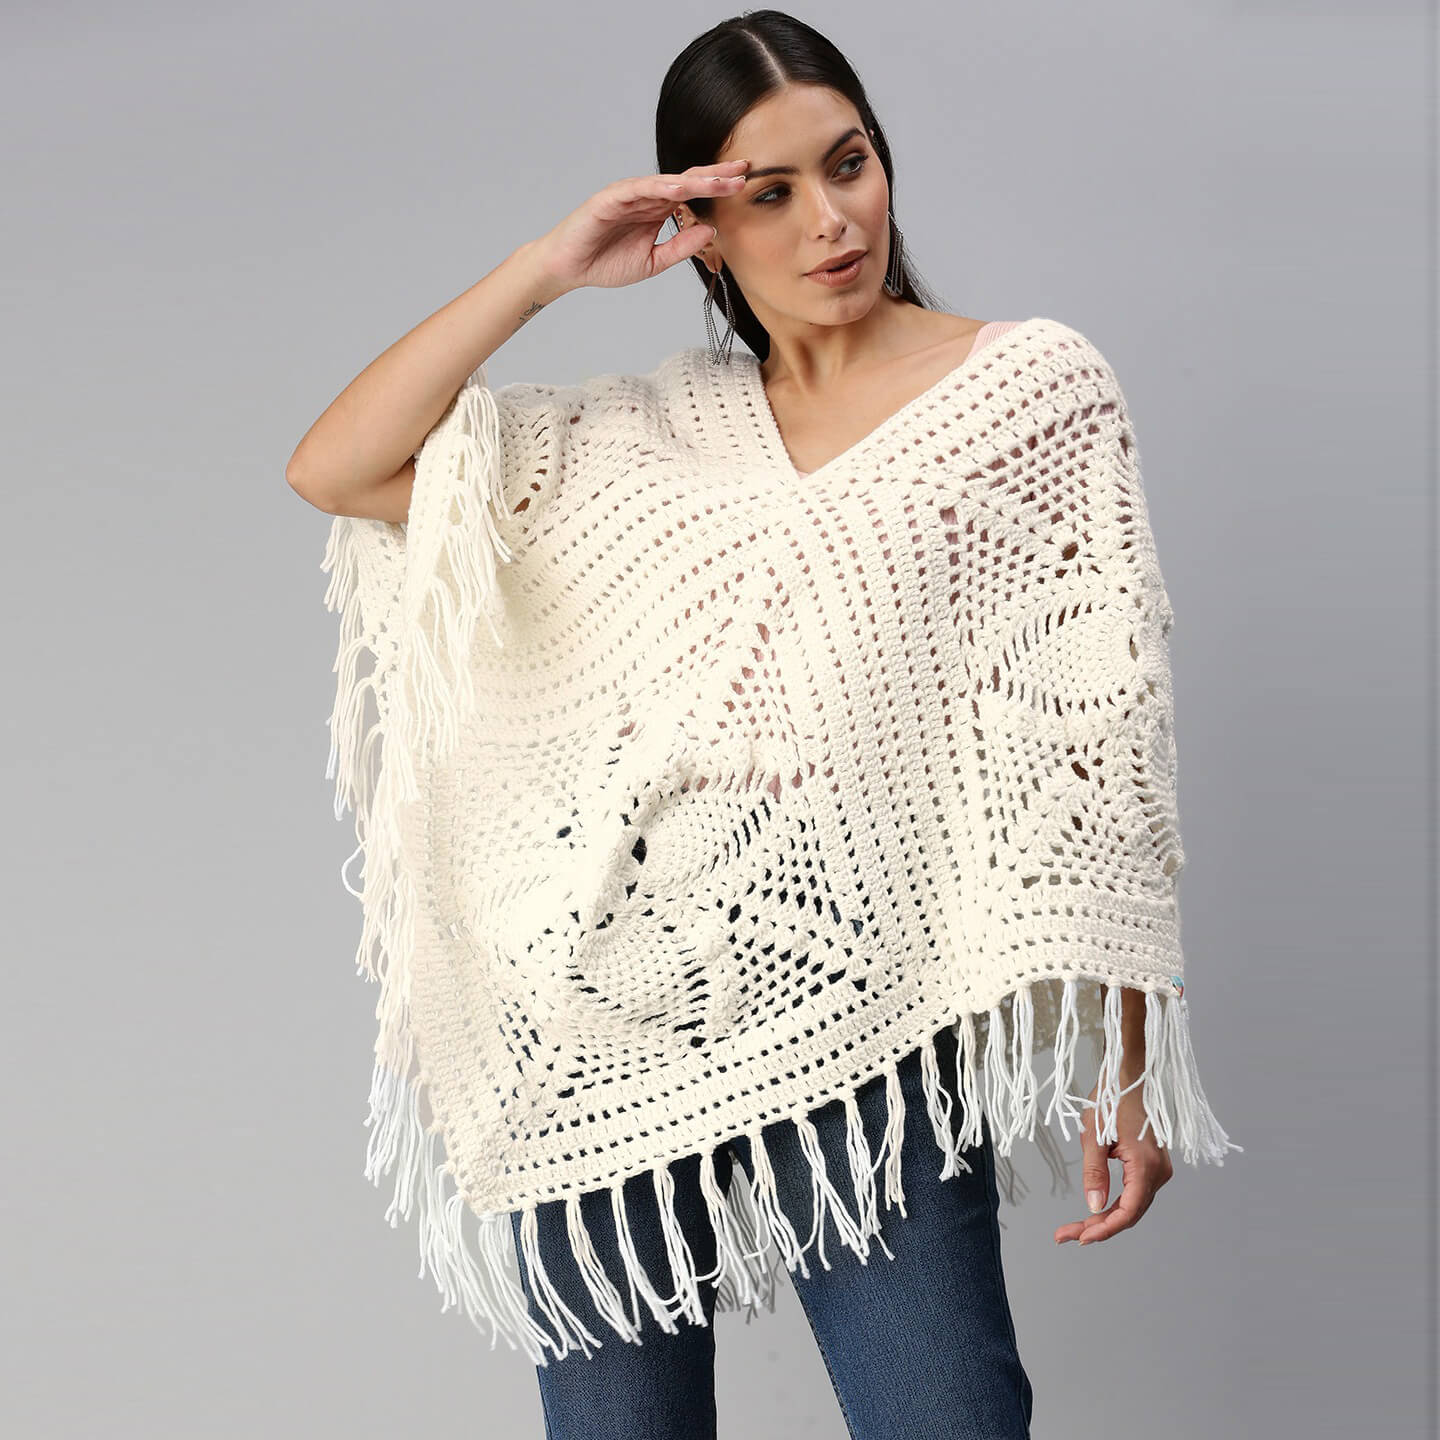 Poncho with Tassels - White 2869